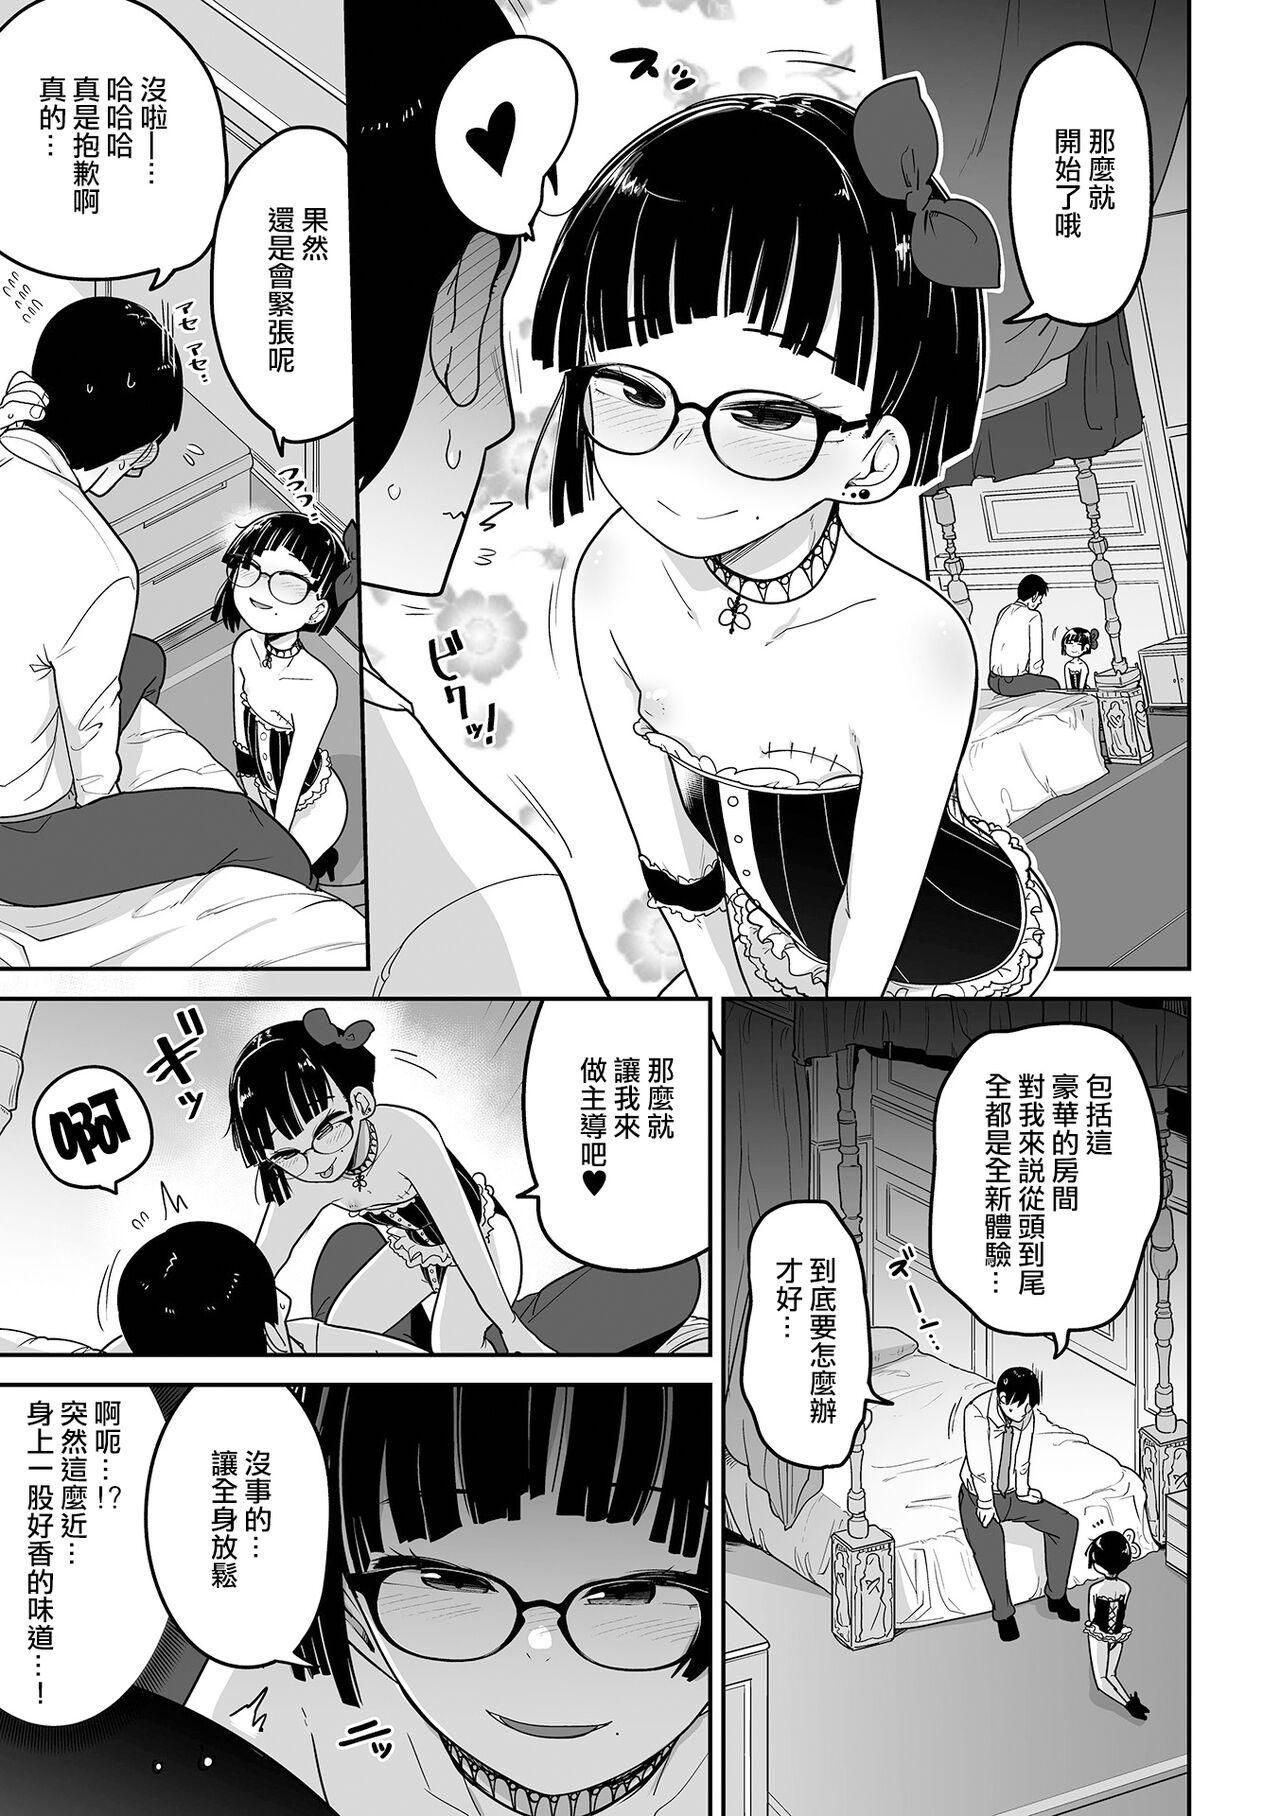 Amature Sex Kesson Shoukan e Youkoso | 歡迎來到殘缺娼館！ Pay - Page 6